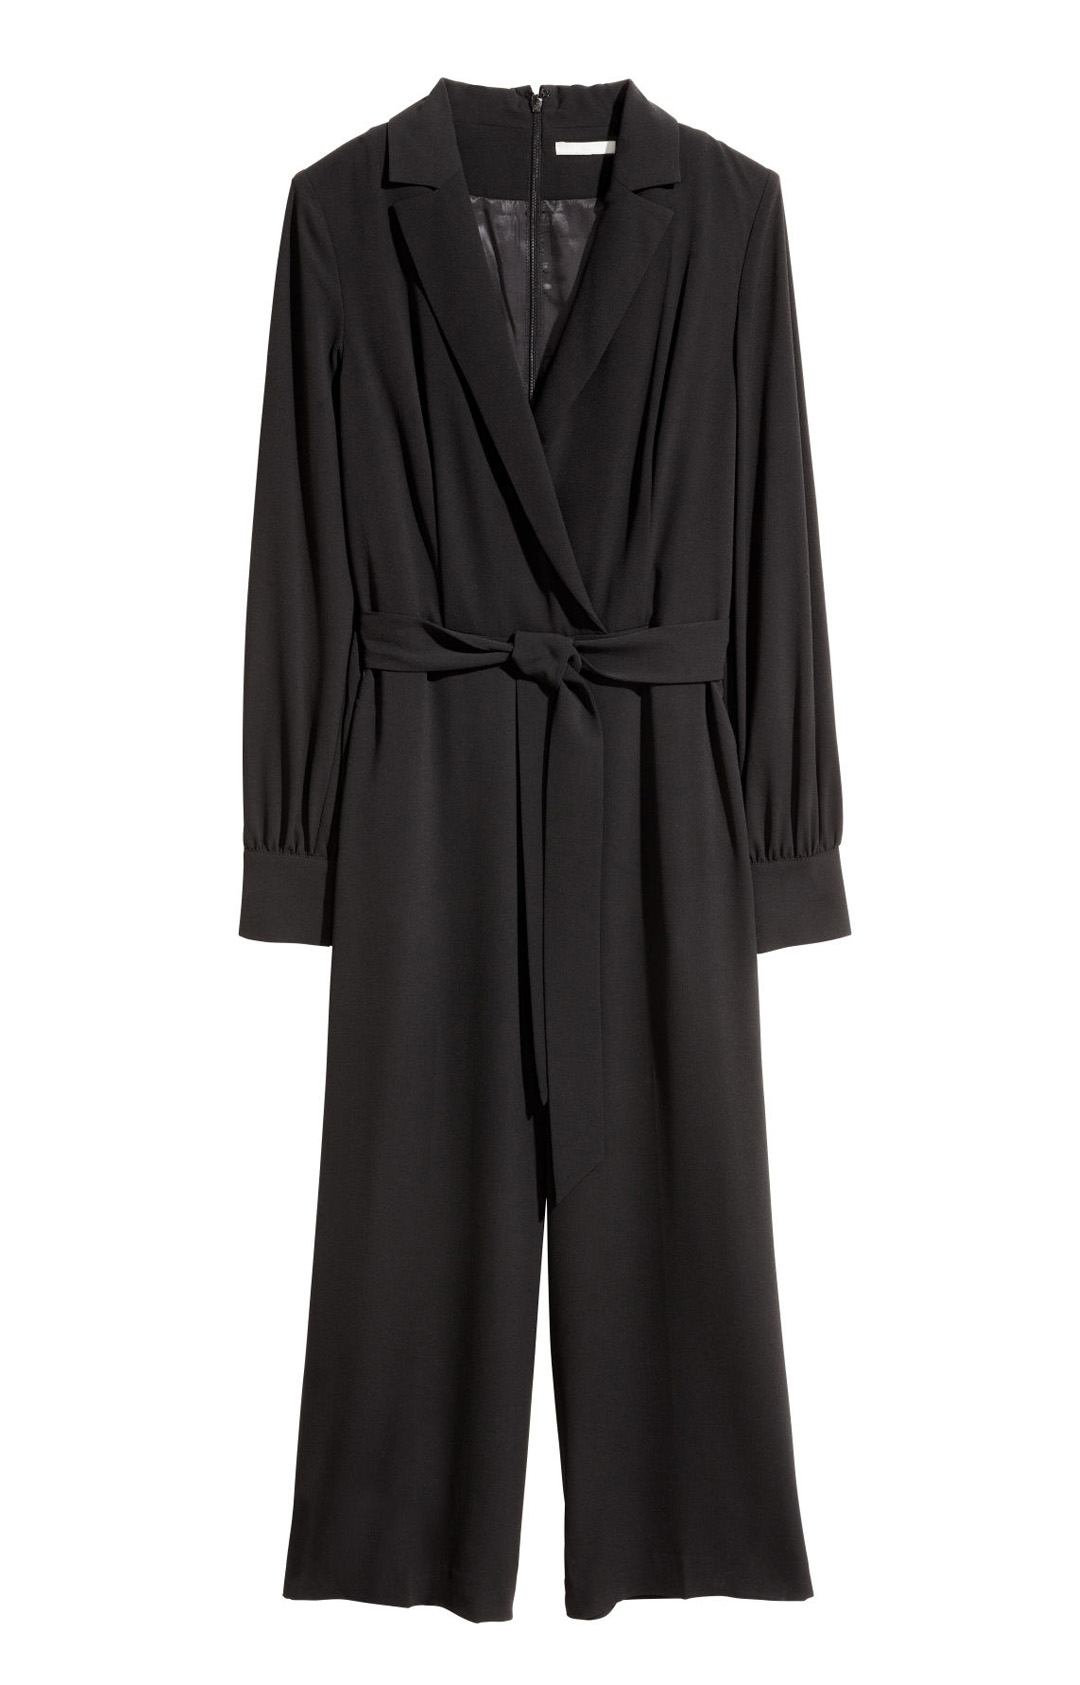 Crepe Jumpsuit, $79.99 from H&M